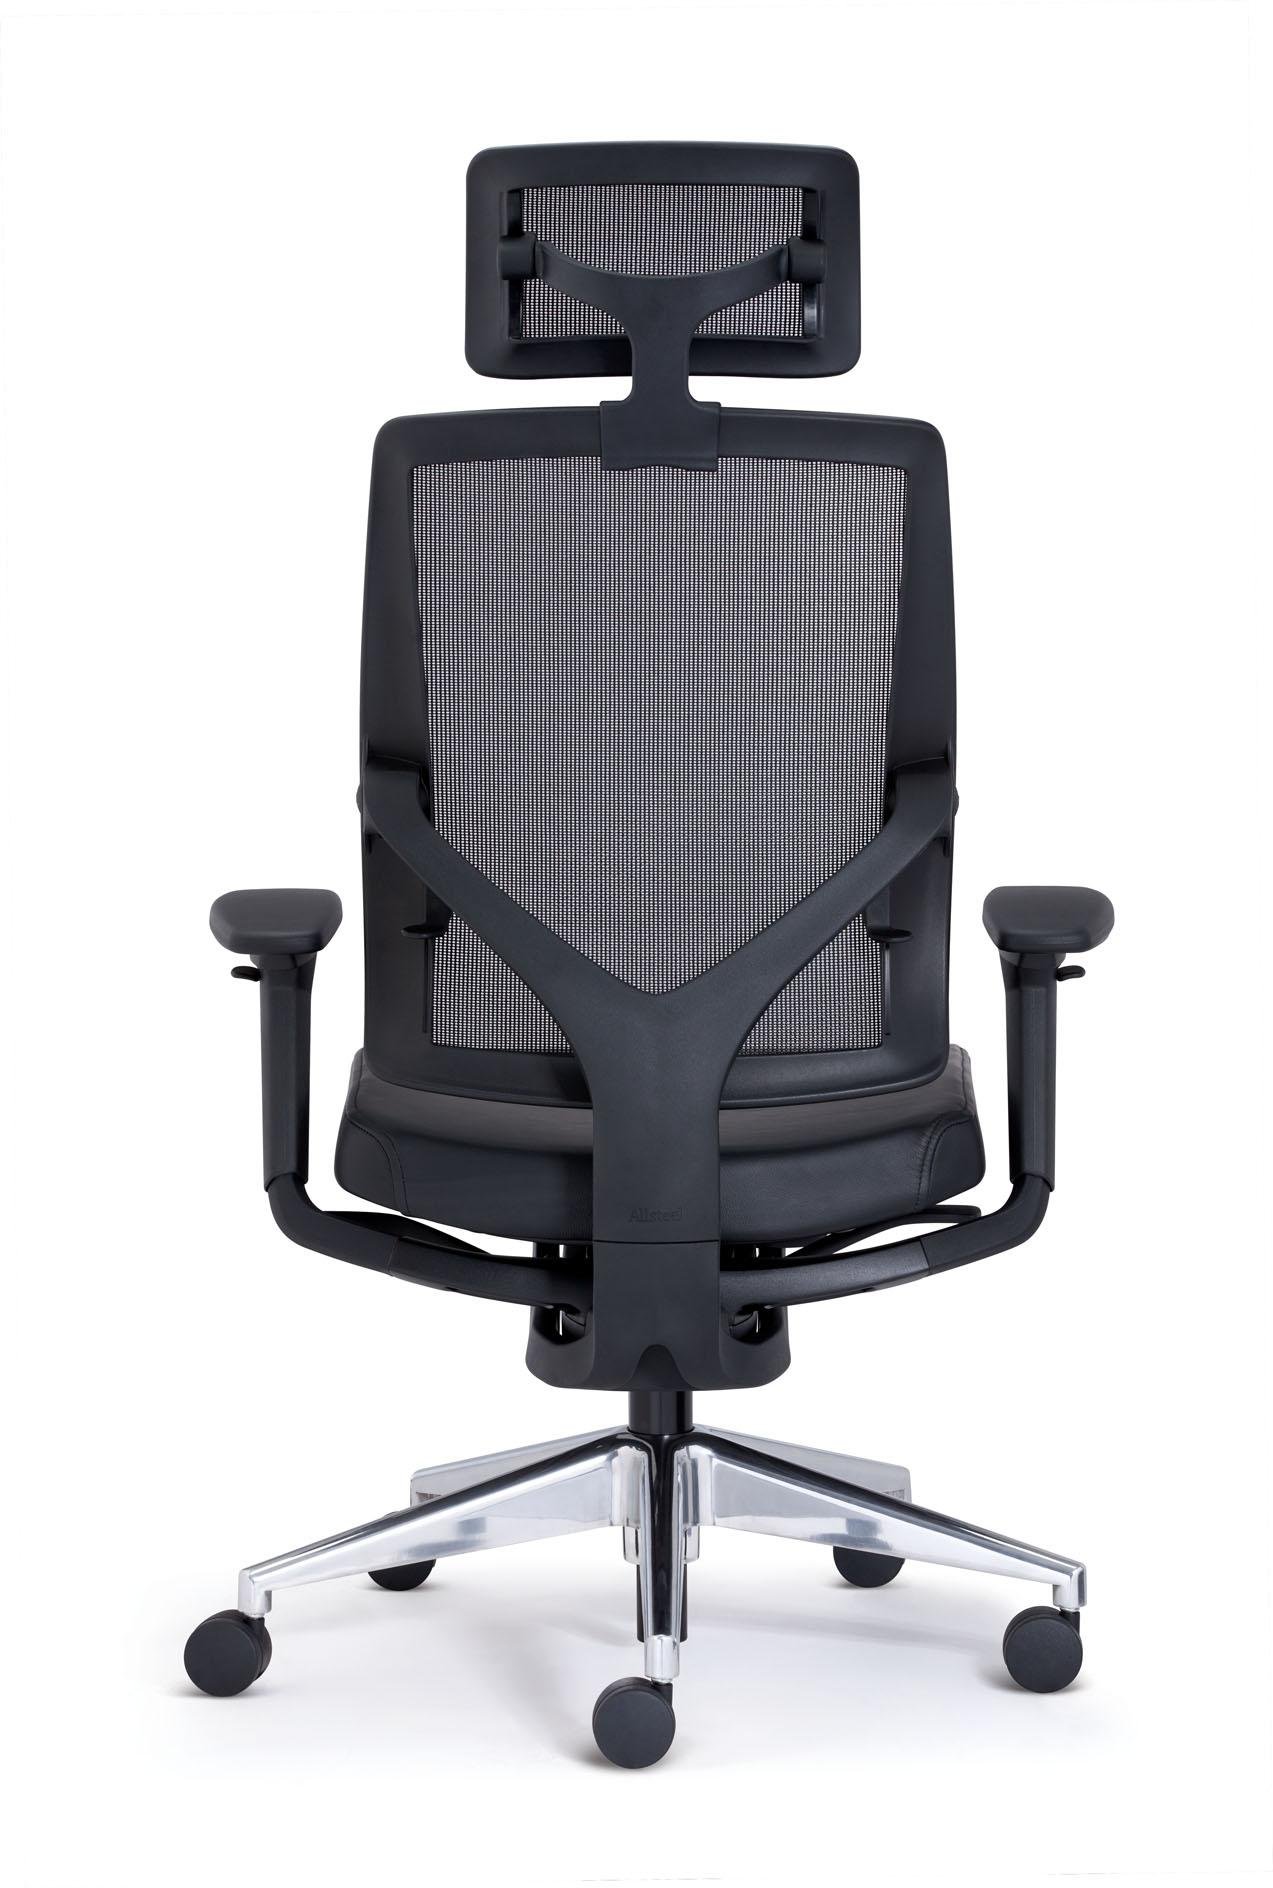 Allsteel Relate office chair MESH CHAIR网椅 4